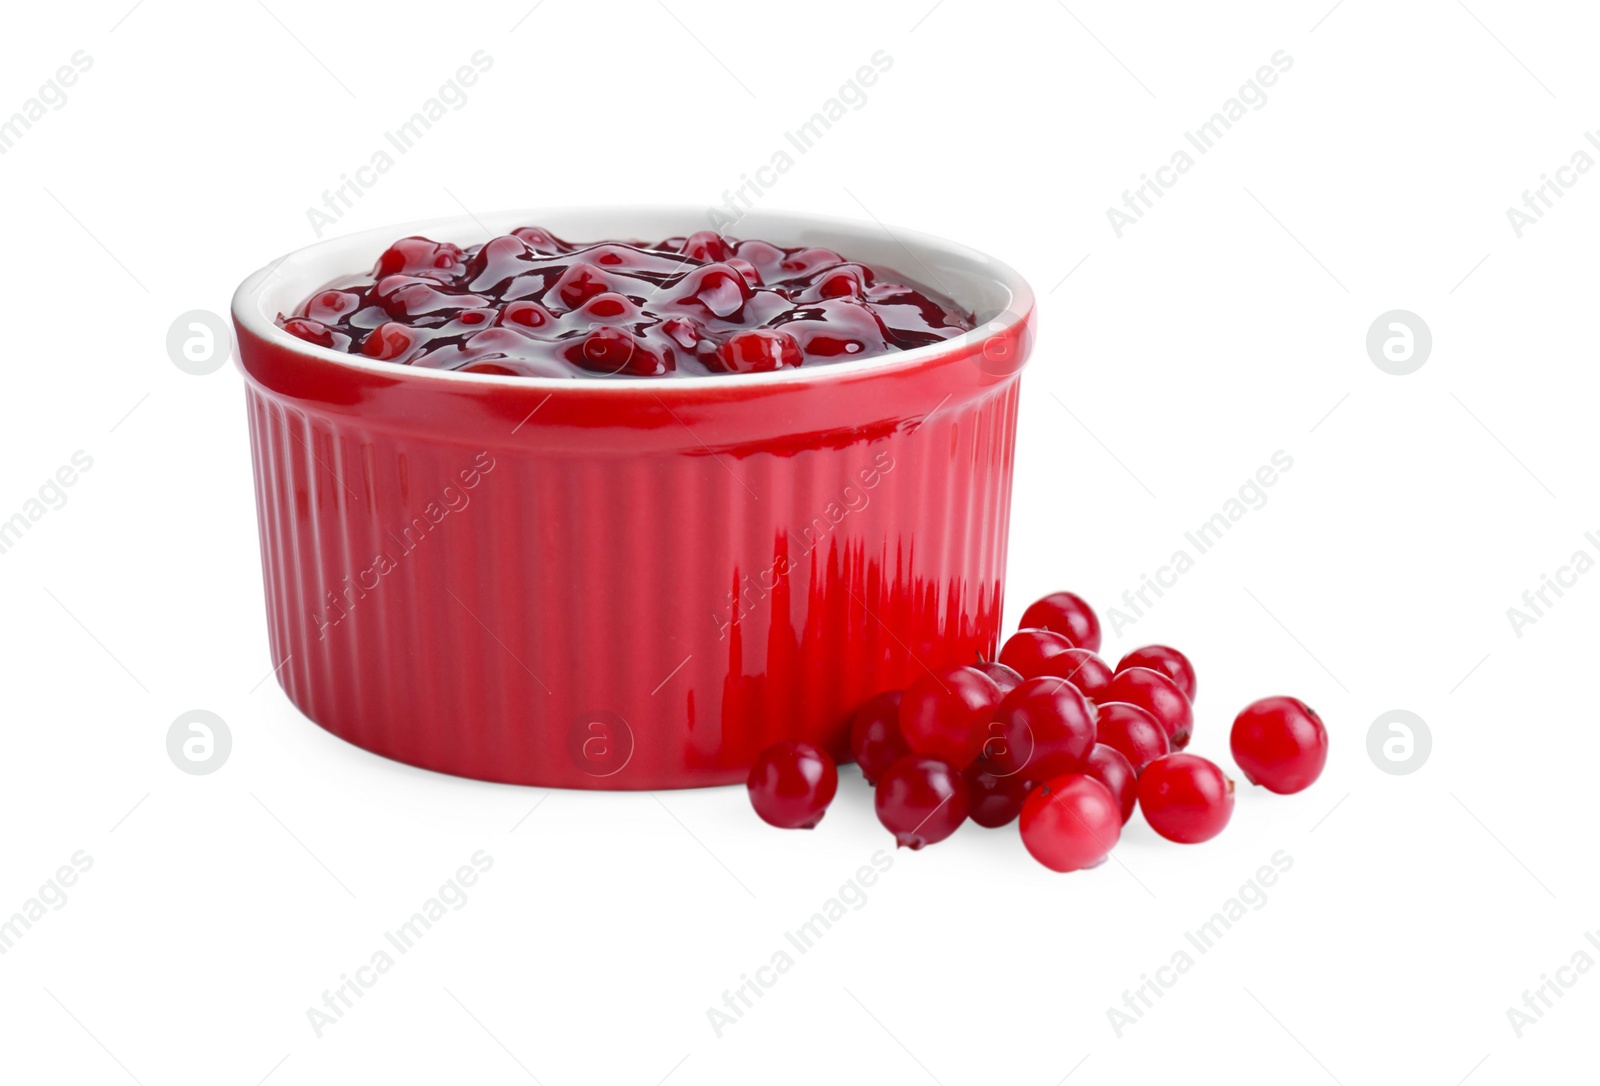 Photo of Cranberry sauce in bowl and fresh berries isolated on white